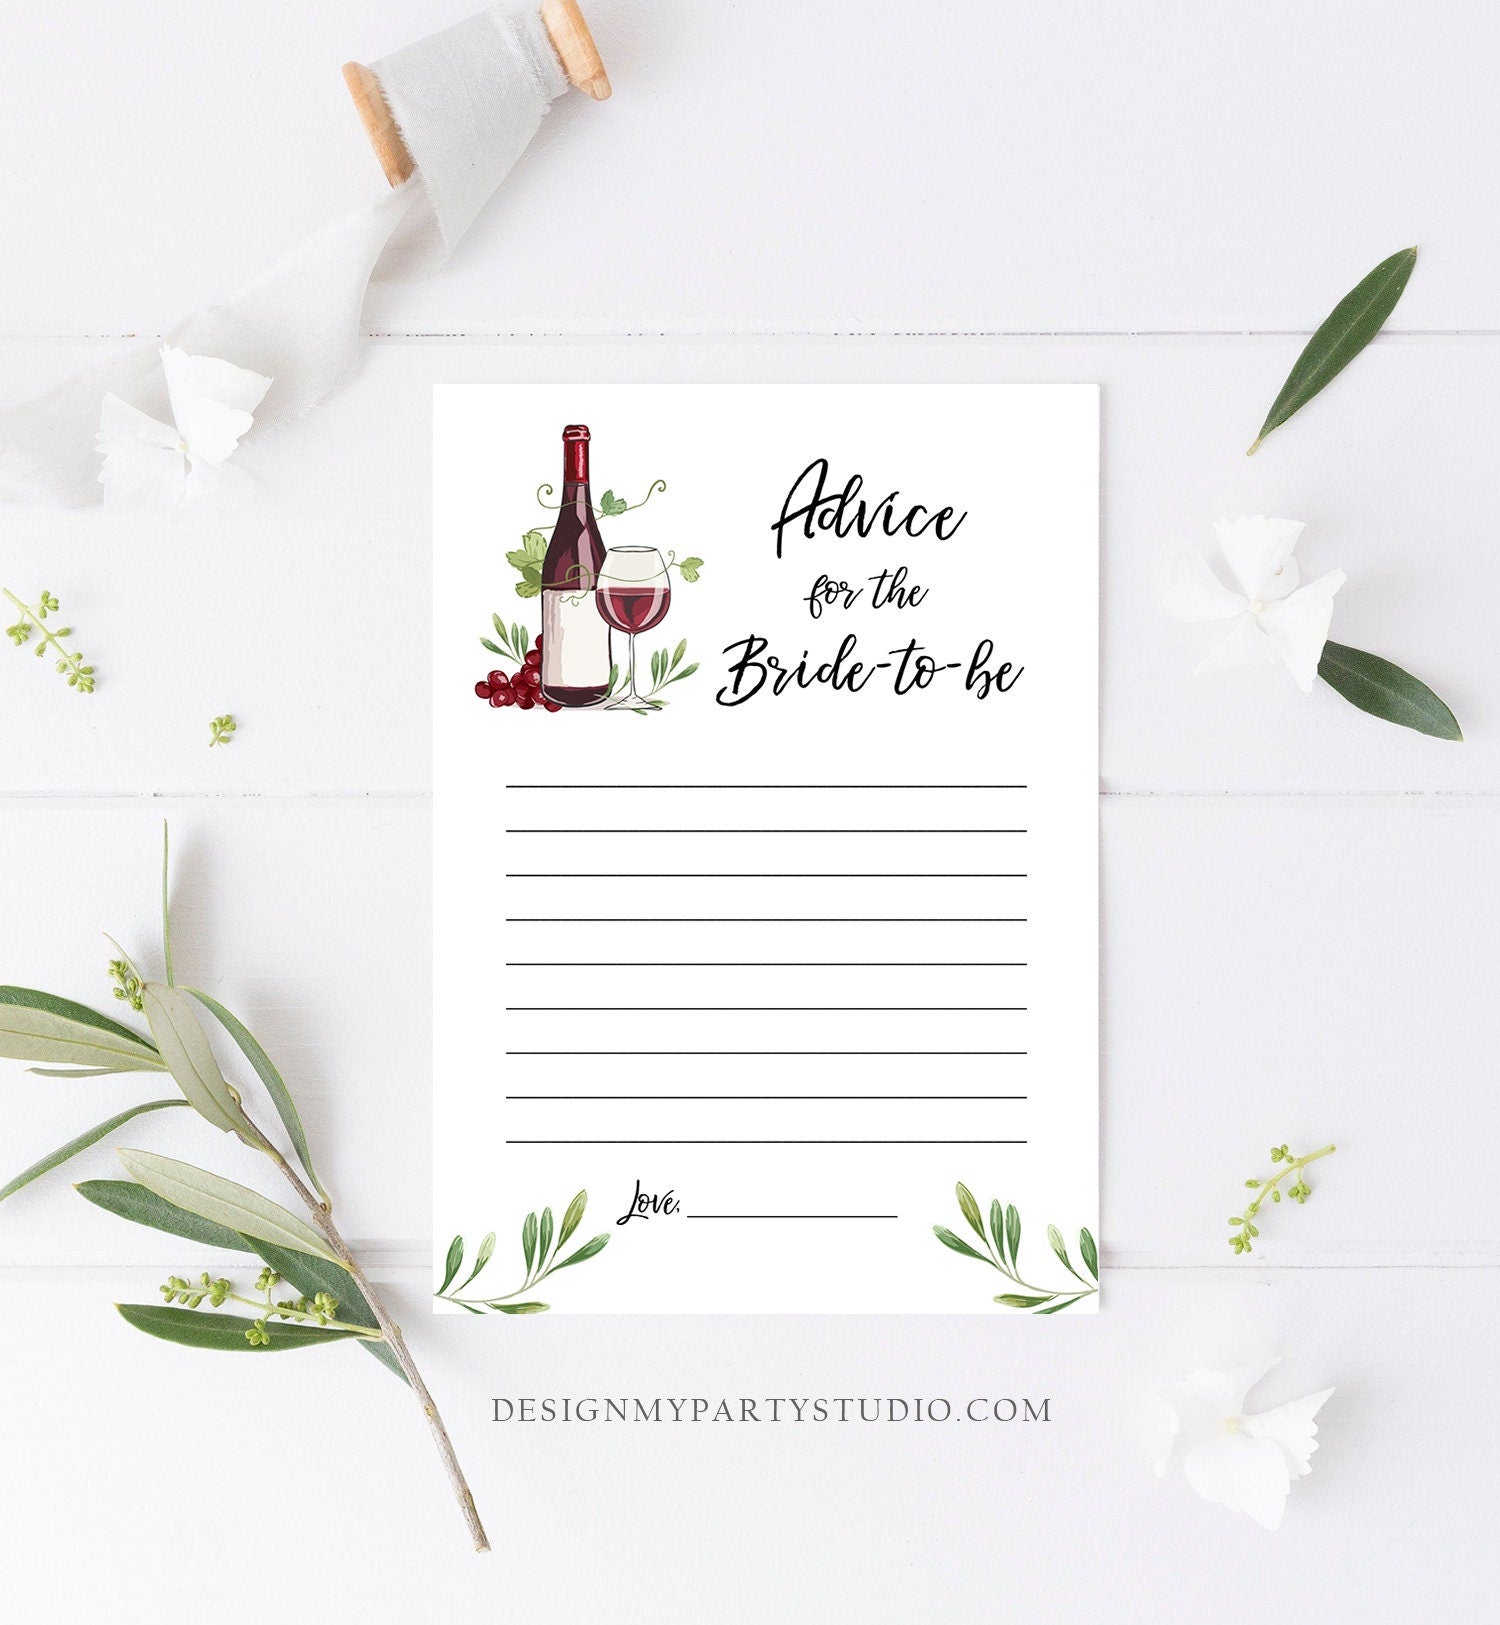 Editable Advice for the Bride-to-be Card Words of Wisdom Wine Grapes Vineyard Shower Game Wine Bottle Glass Corjl Template Printable 0234